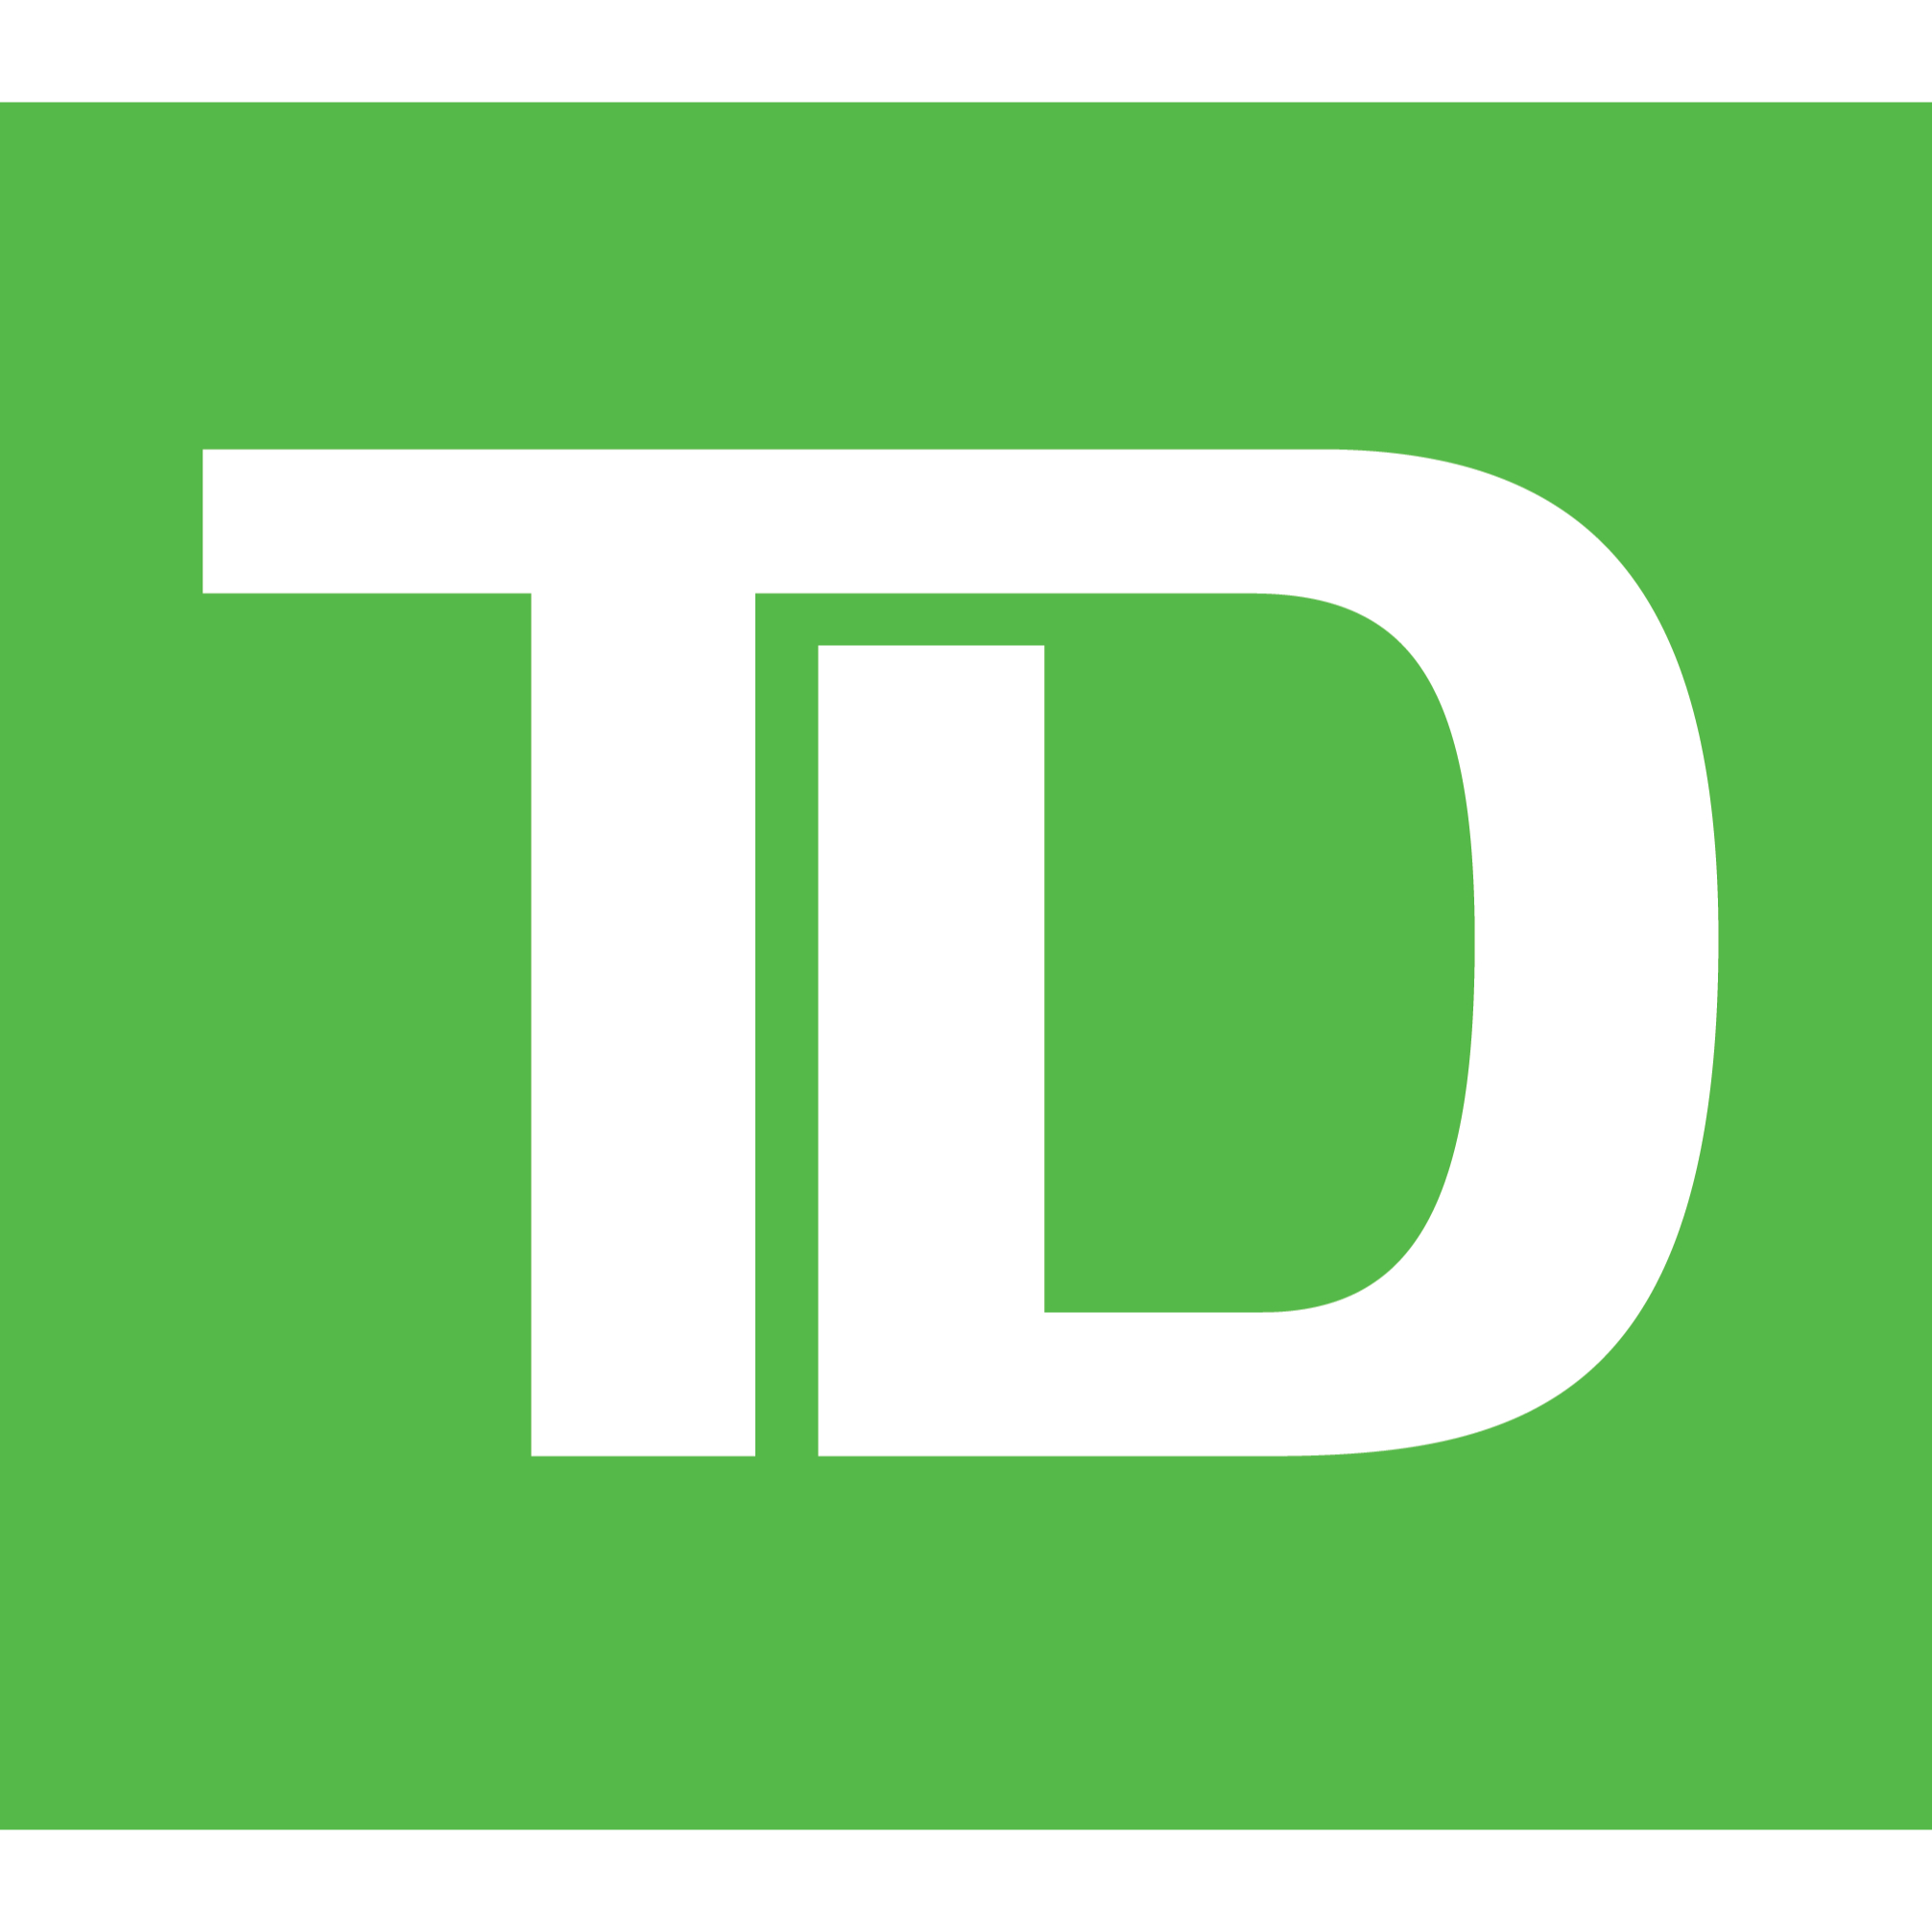 Islam Abdallah - TD Account Manager Small Business - Investment Advisory Services